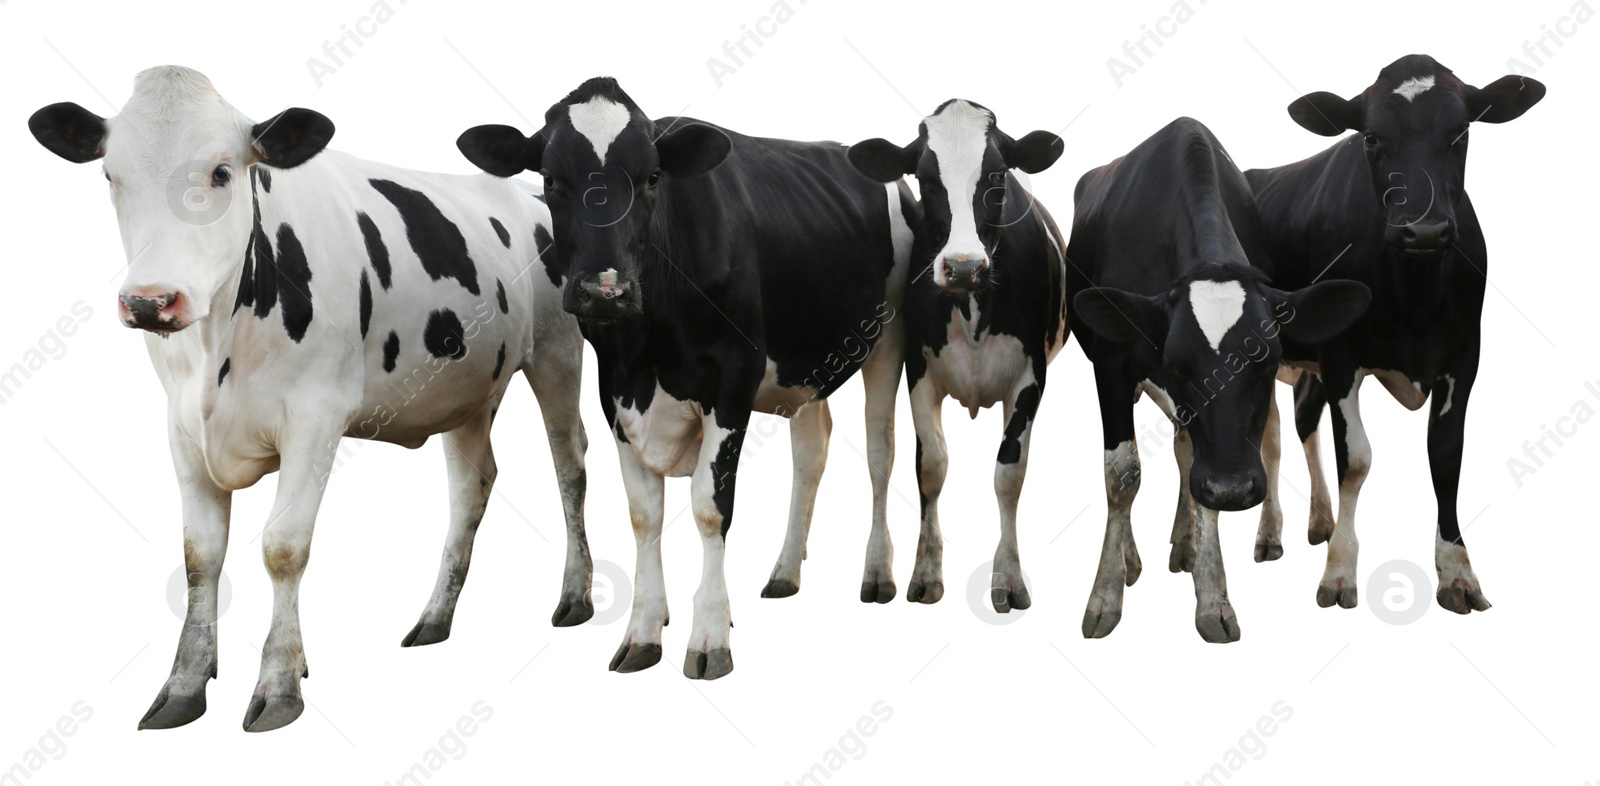 Image of Cute cows on white background, banner design. Animal husbandry